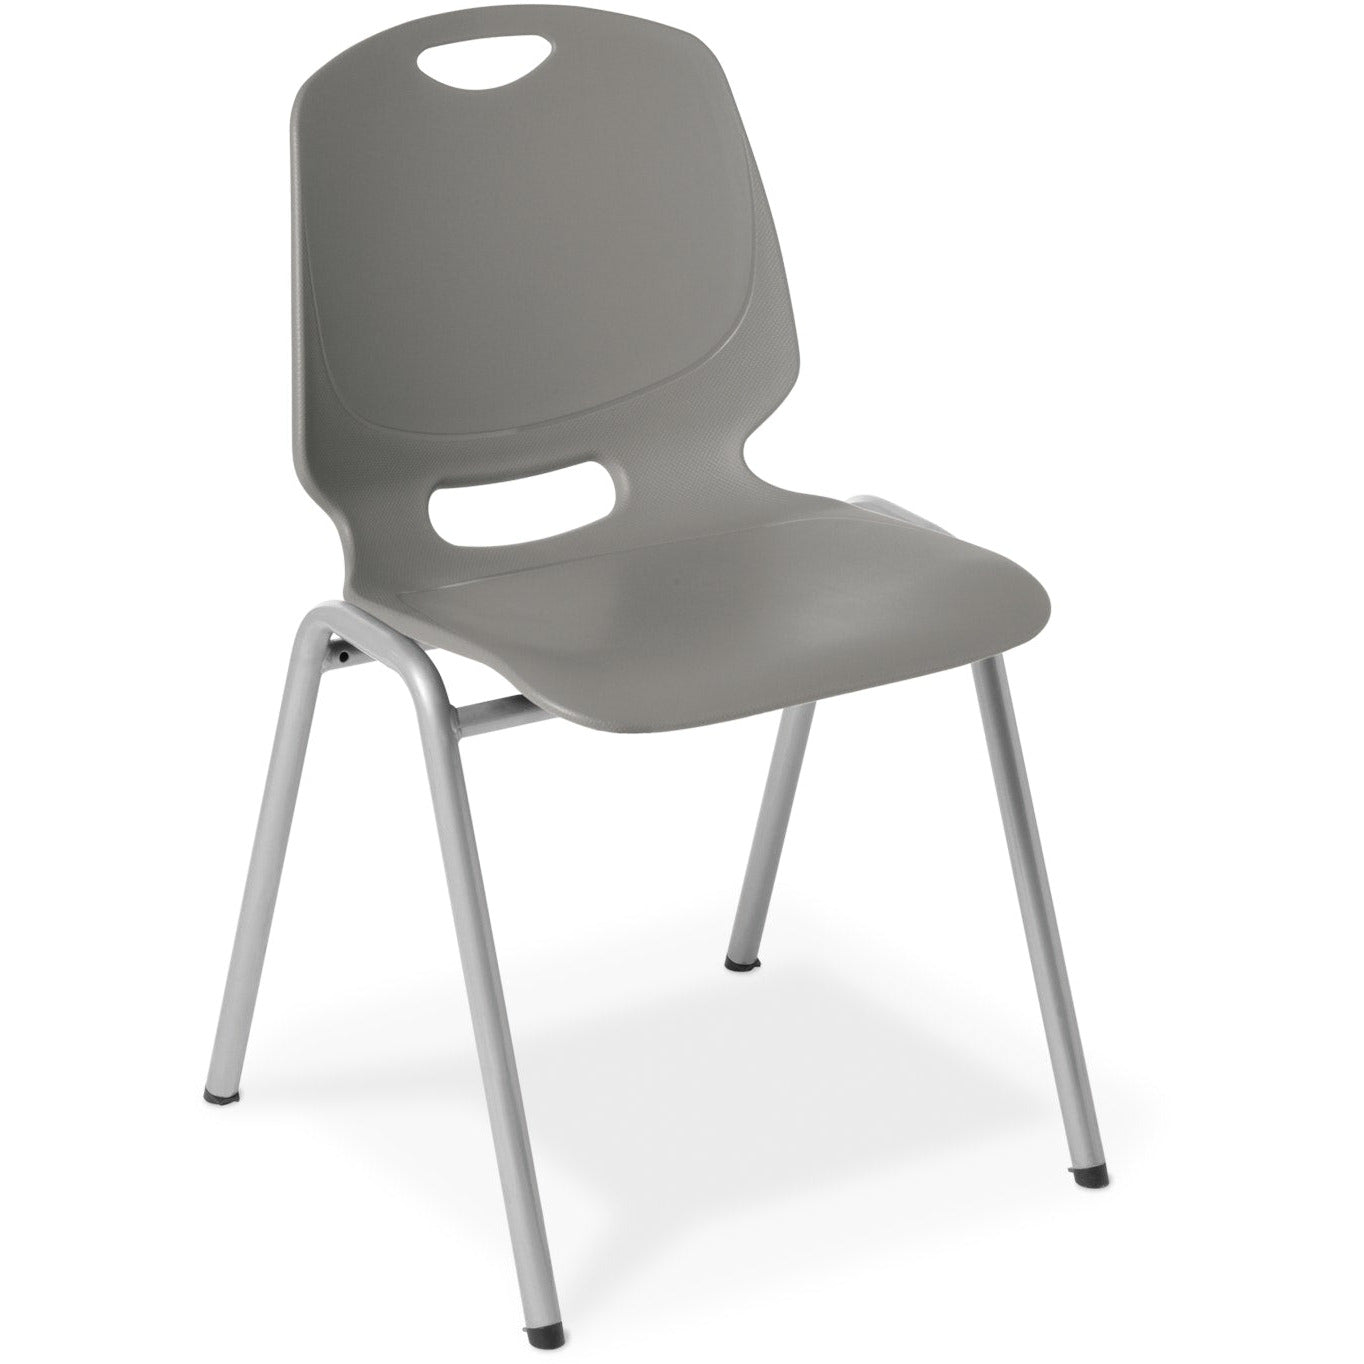 Spark Chair-Stackable seating-Smart Office Furniture